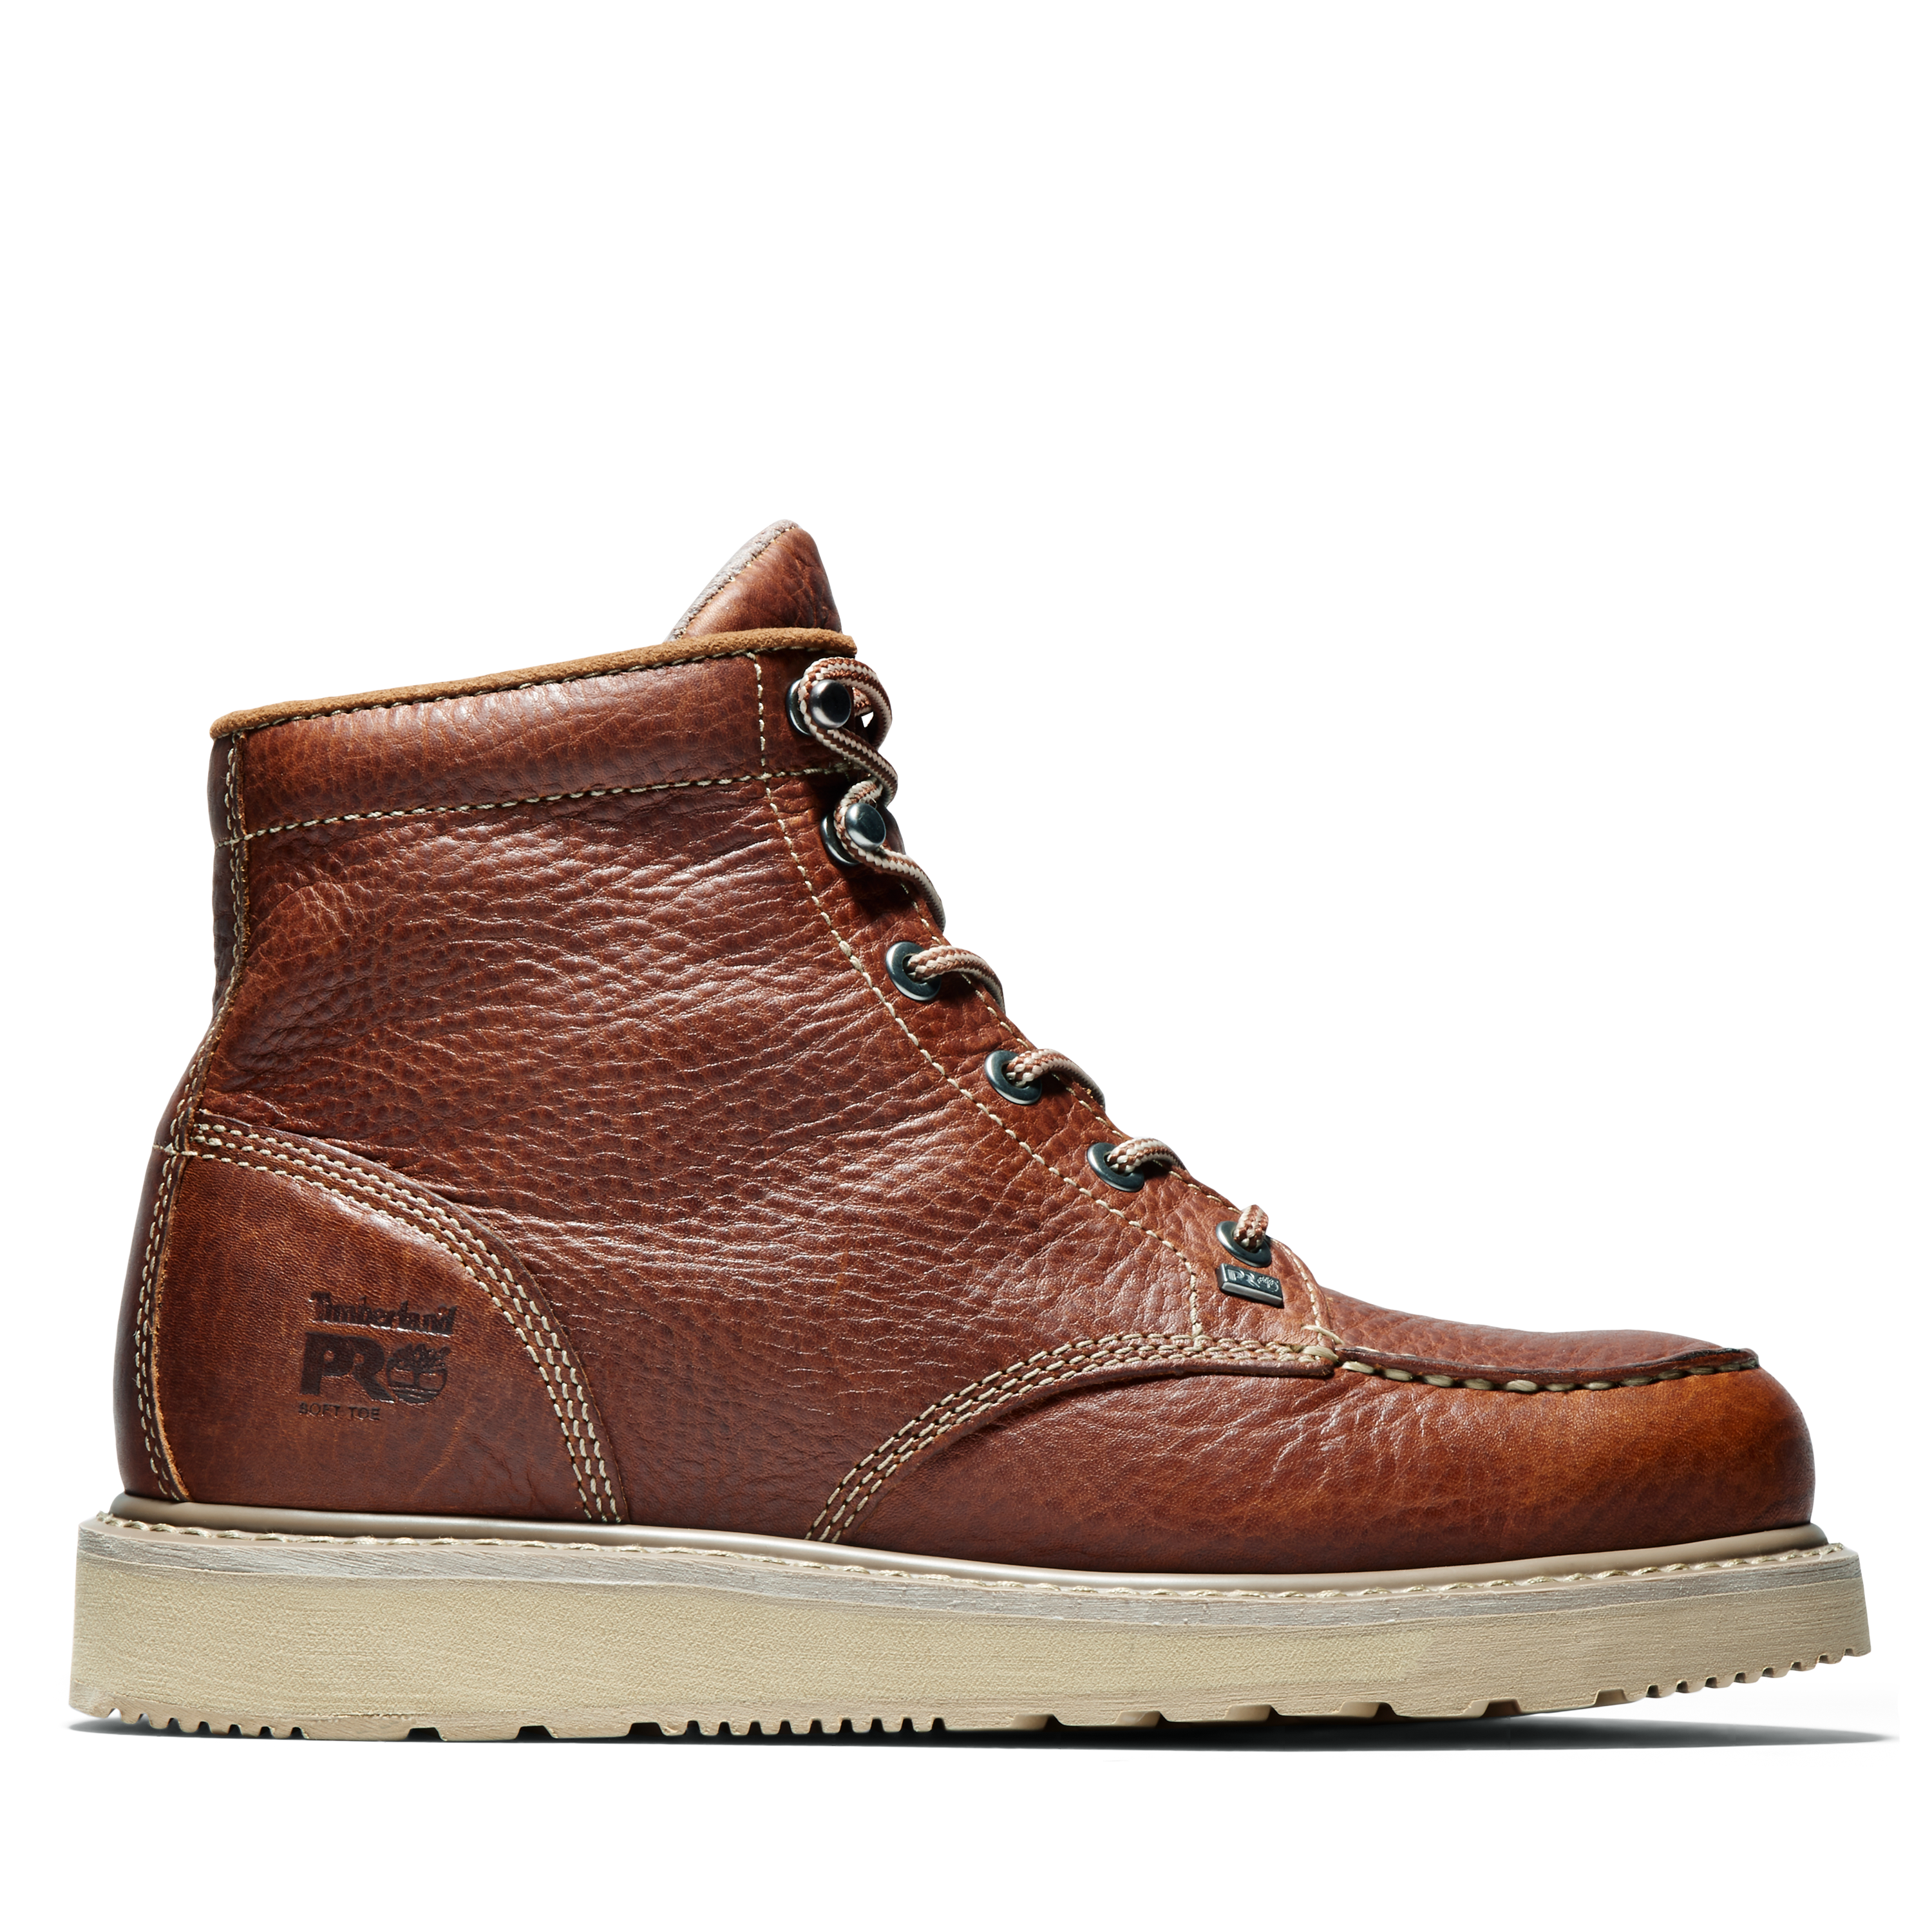 Timberland Pro Barstow 6" - Wide - Mens